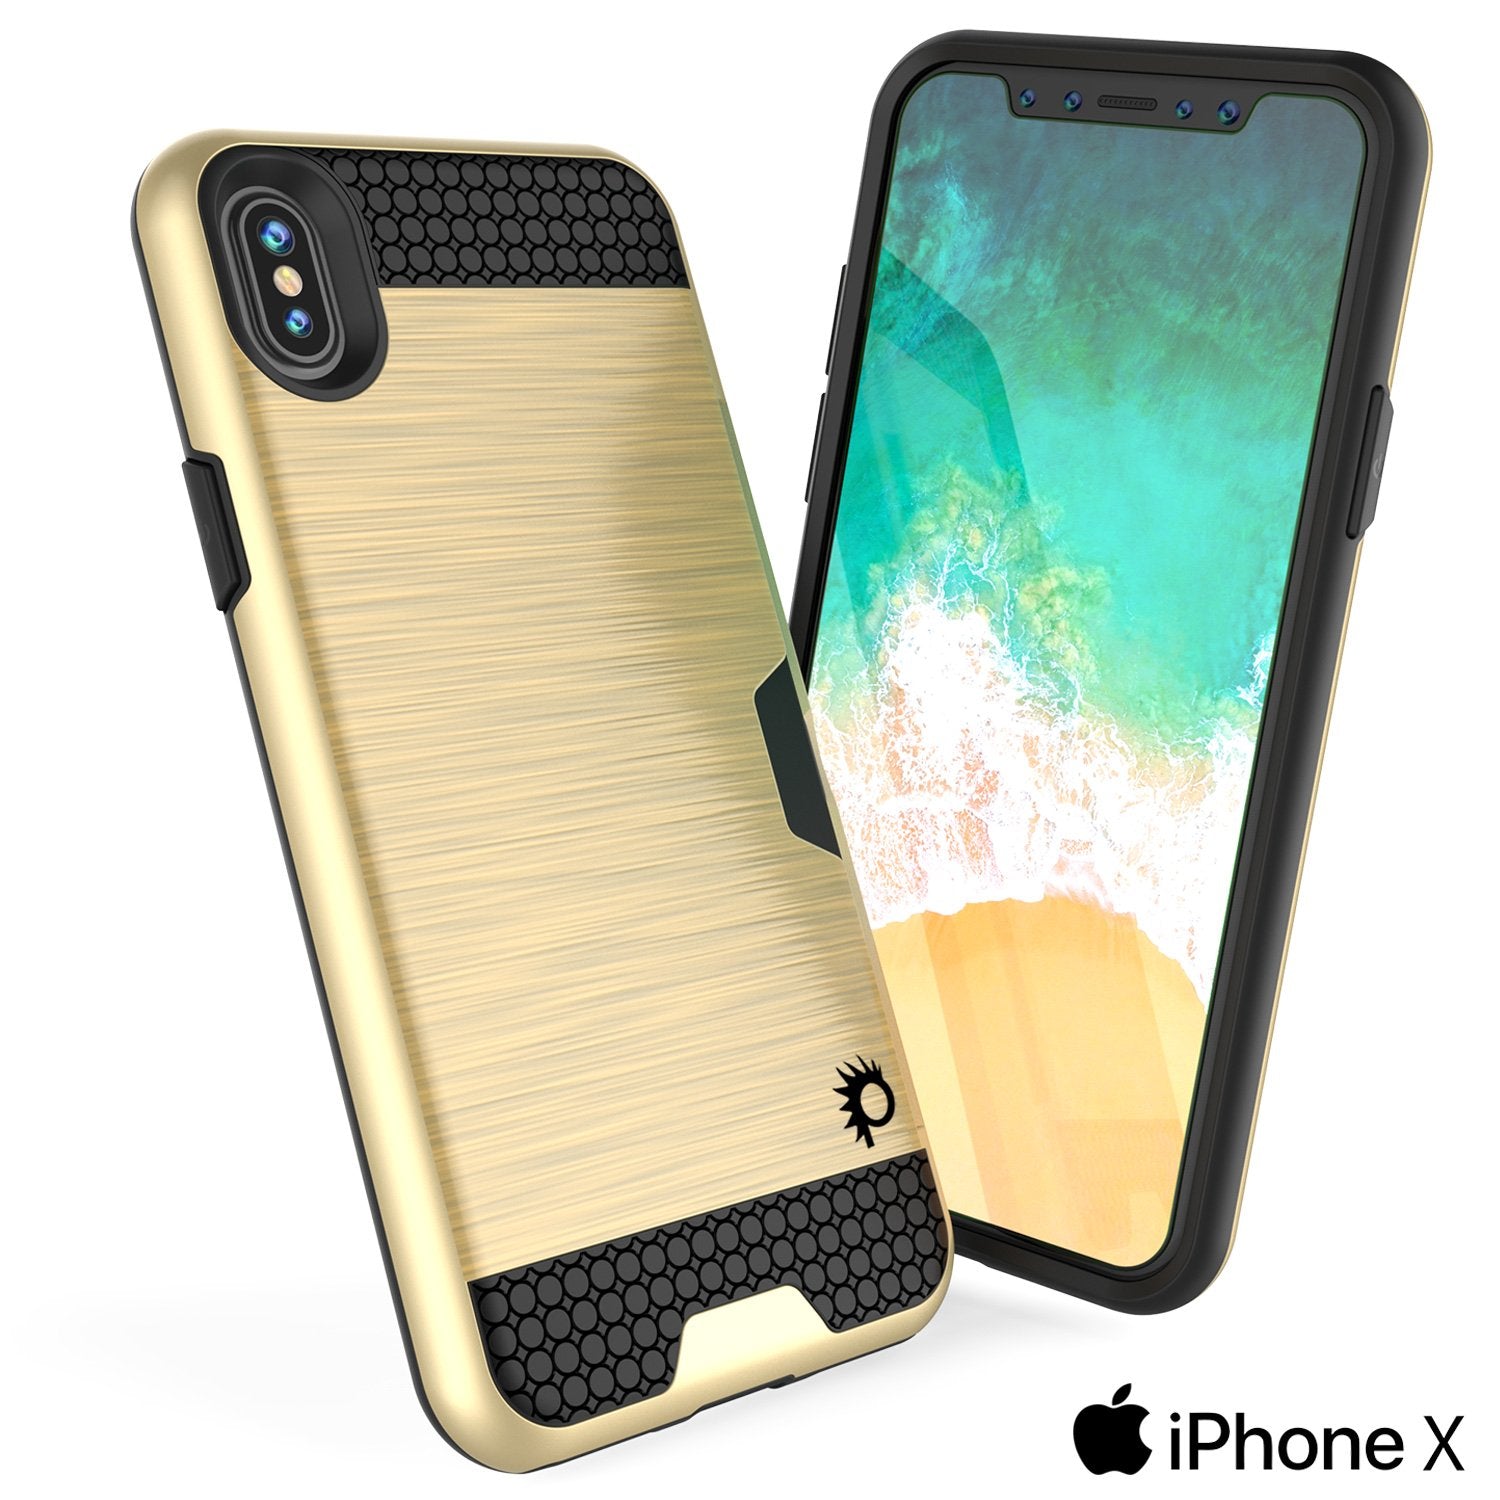 iPhone X Case, PUNKcase [SLOT Series] Slim Fit Dual-Layer Armor Cover & Tempered Glass PUNKSHIELD Screen Protector for Apple iPhone X [Gold] - PunkCase NZ